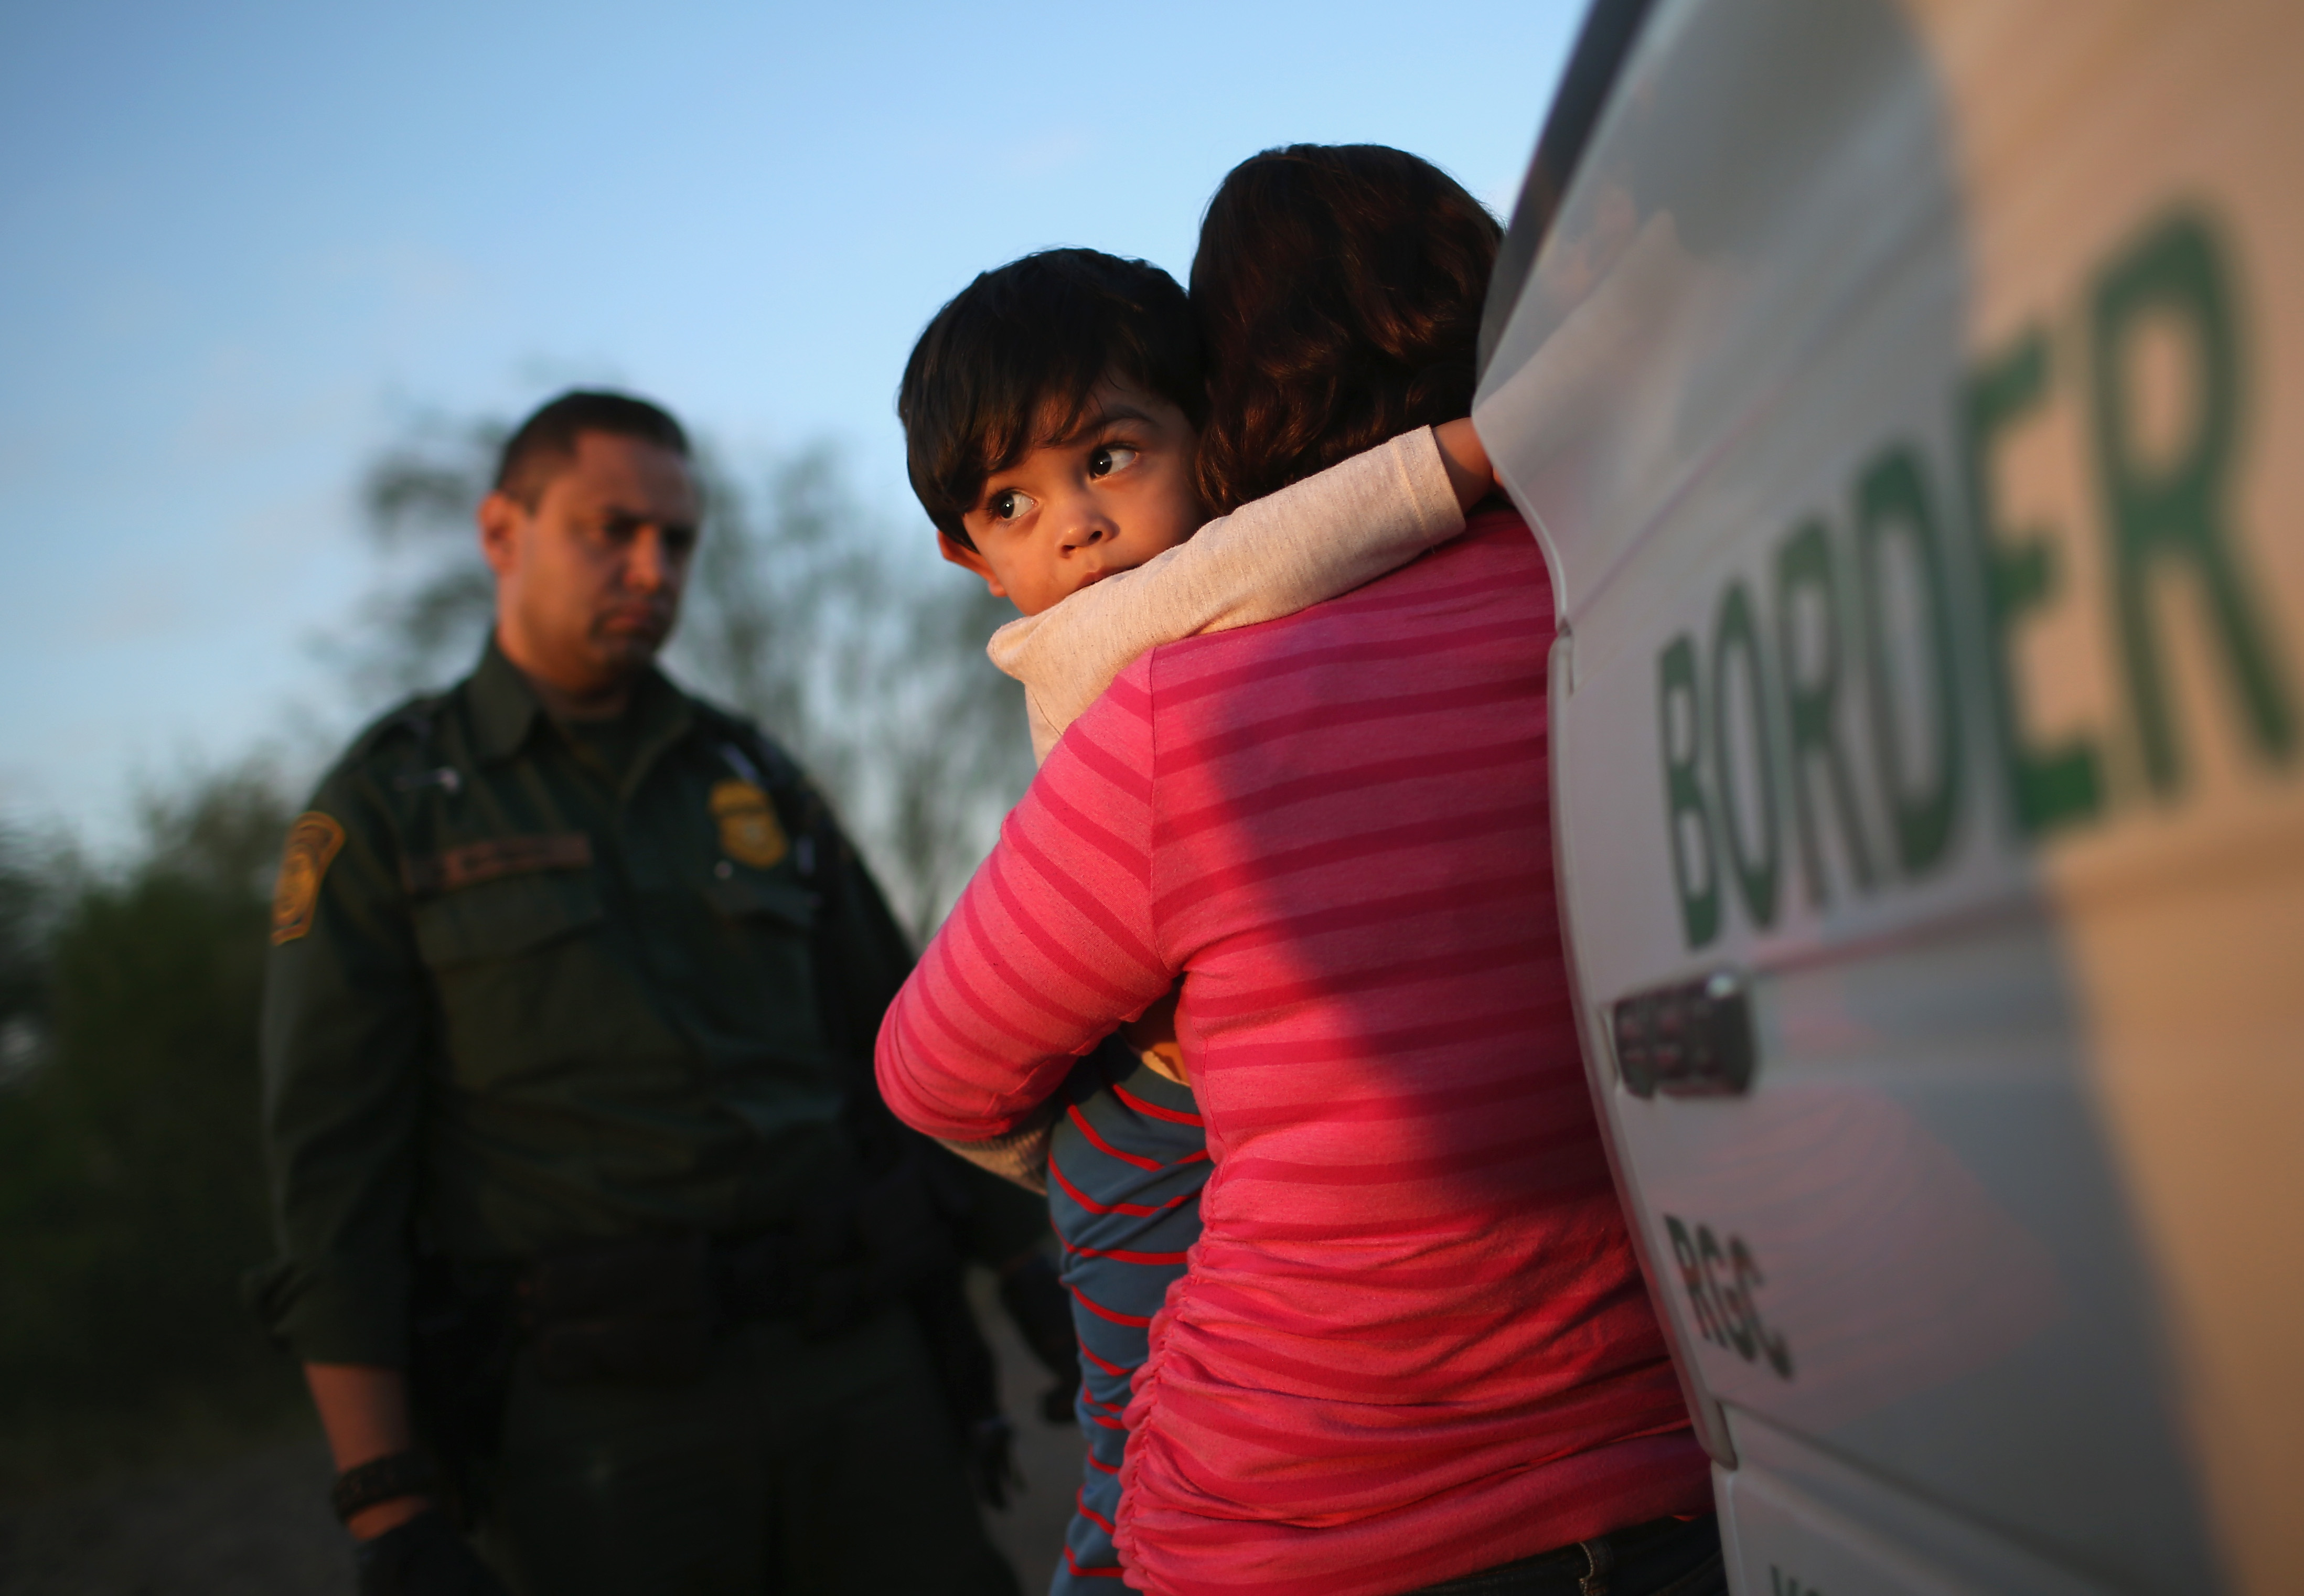 A one-year-old from El Salvador clings to his mother after she turned themselves in to Border Patrol agents on Dec. 7, 2015 near Rio Grande City, Texas. (John Moore—Getty Images)